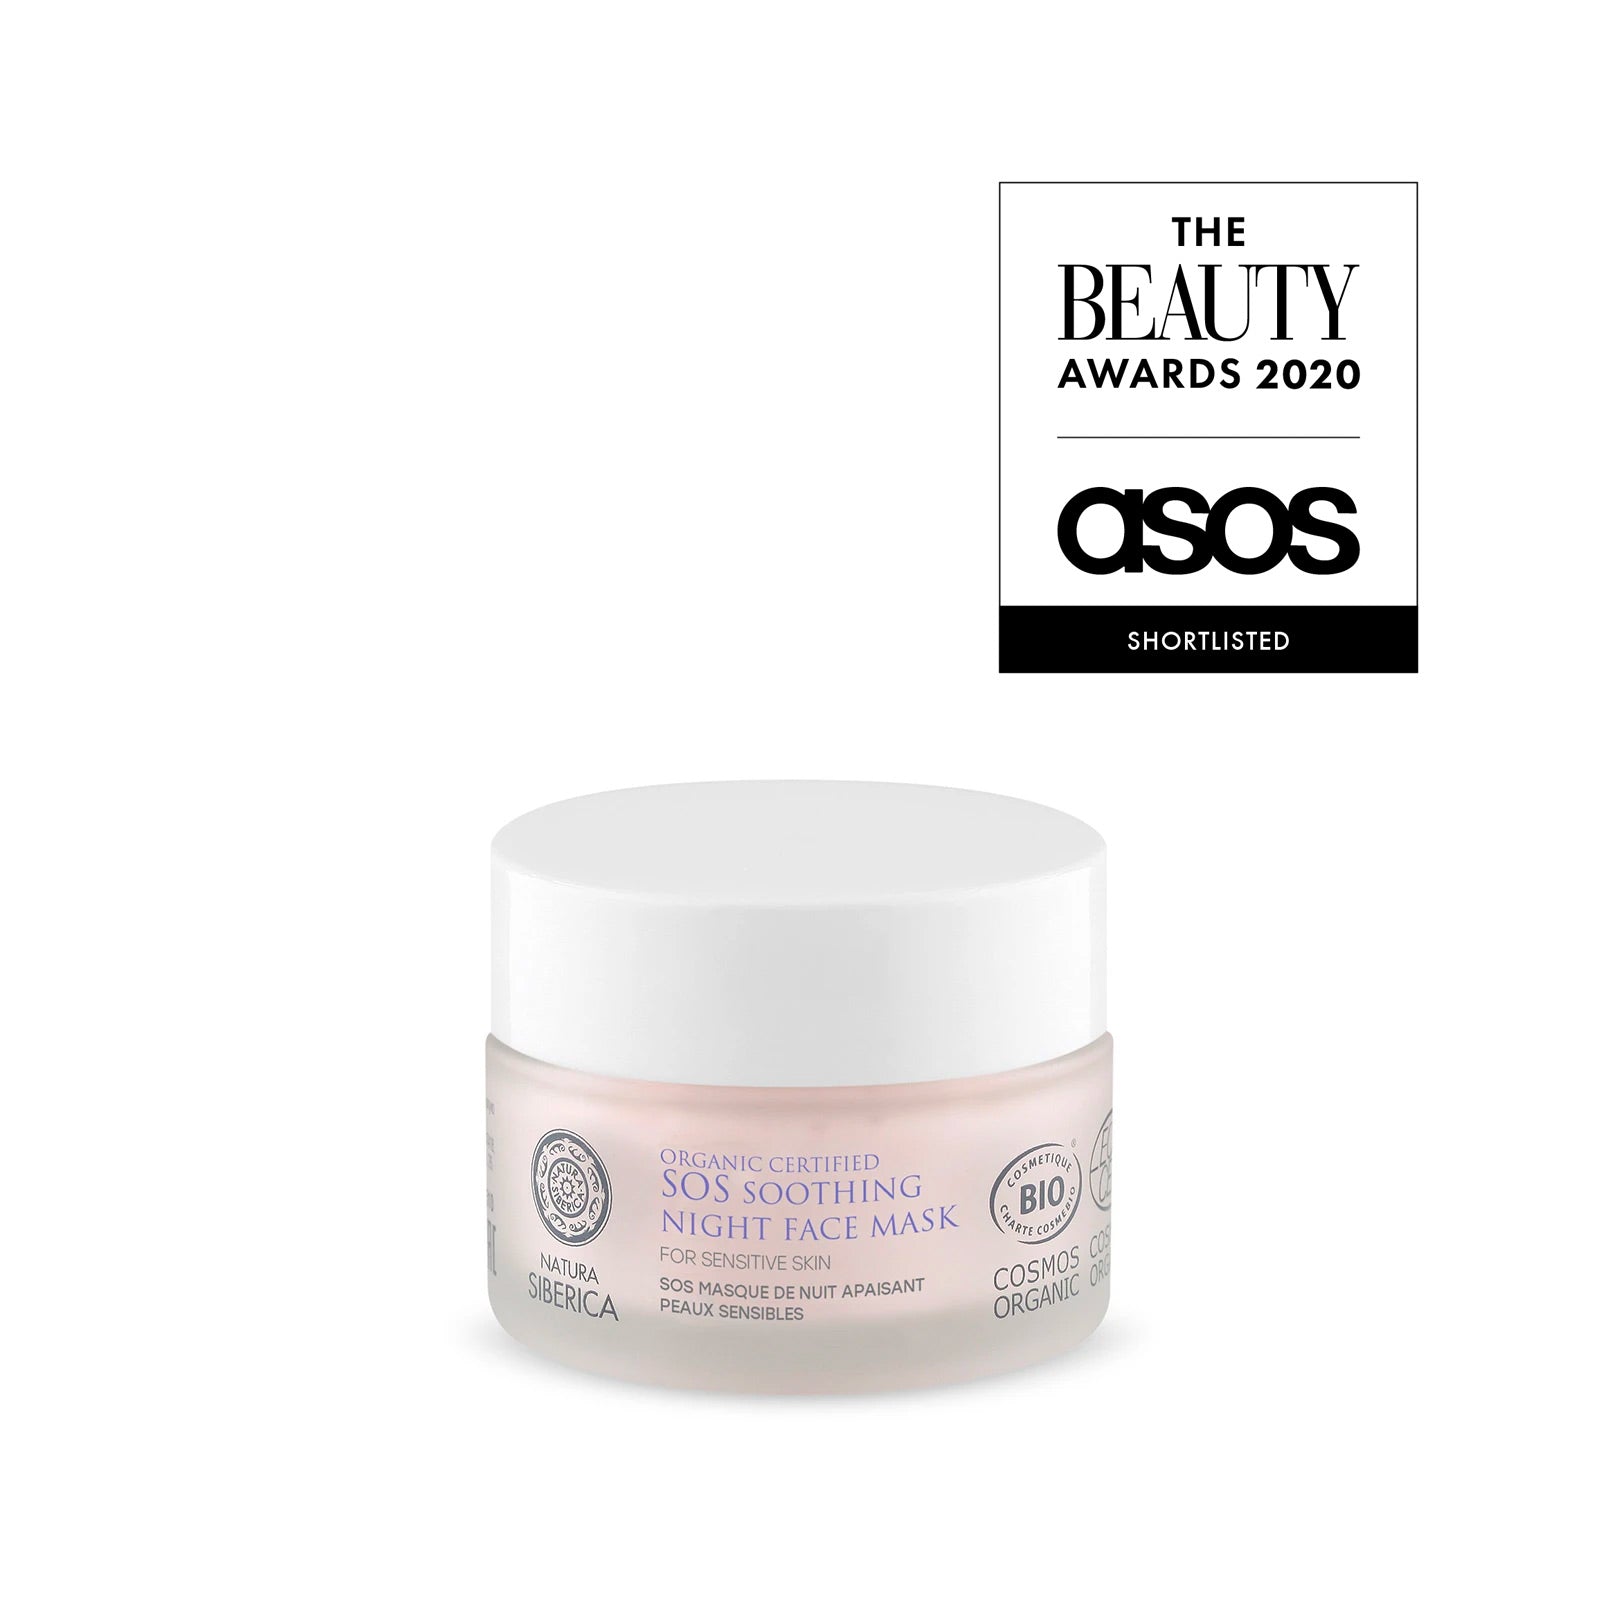 SOS Soothing Night Face Mask for sensitive skin, 50 ml